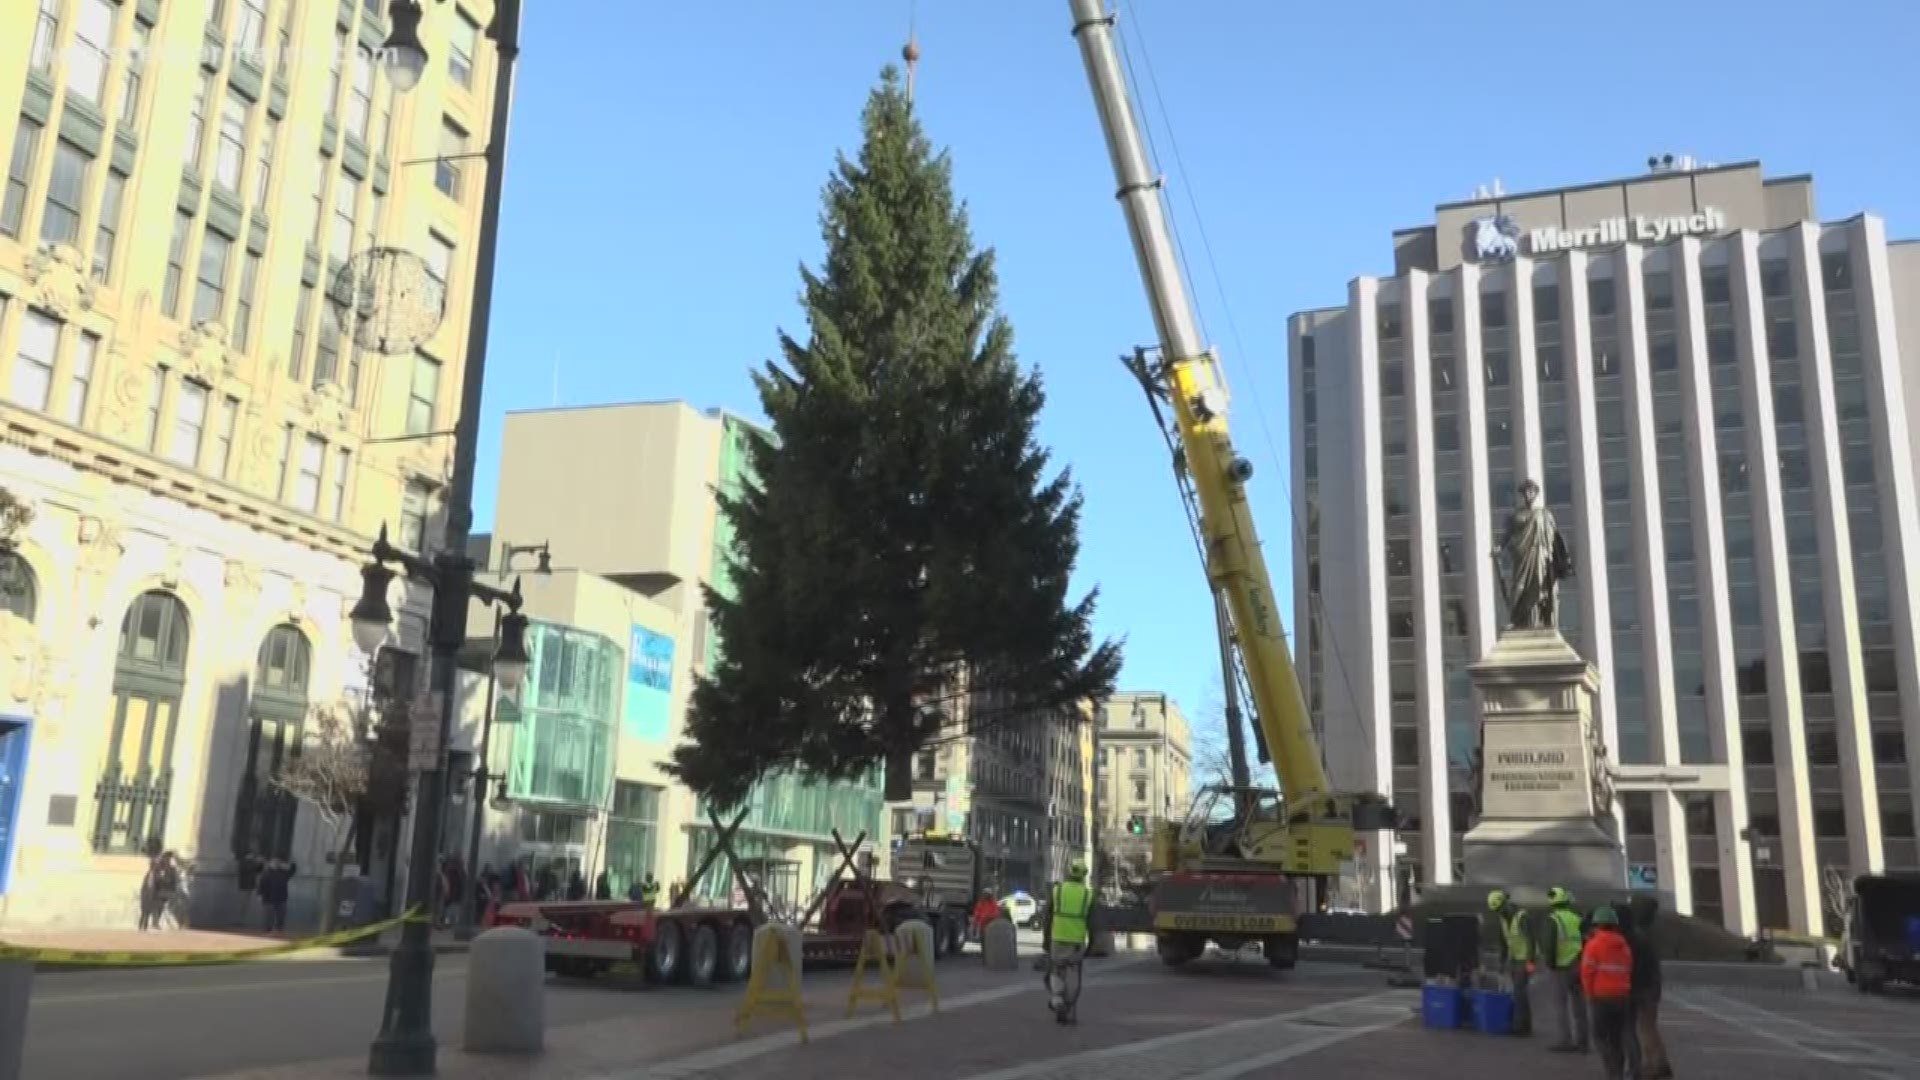 This year's tree is 55 feet tall and 30 feet wide. This is the first year the selected tree has been right near downtown.